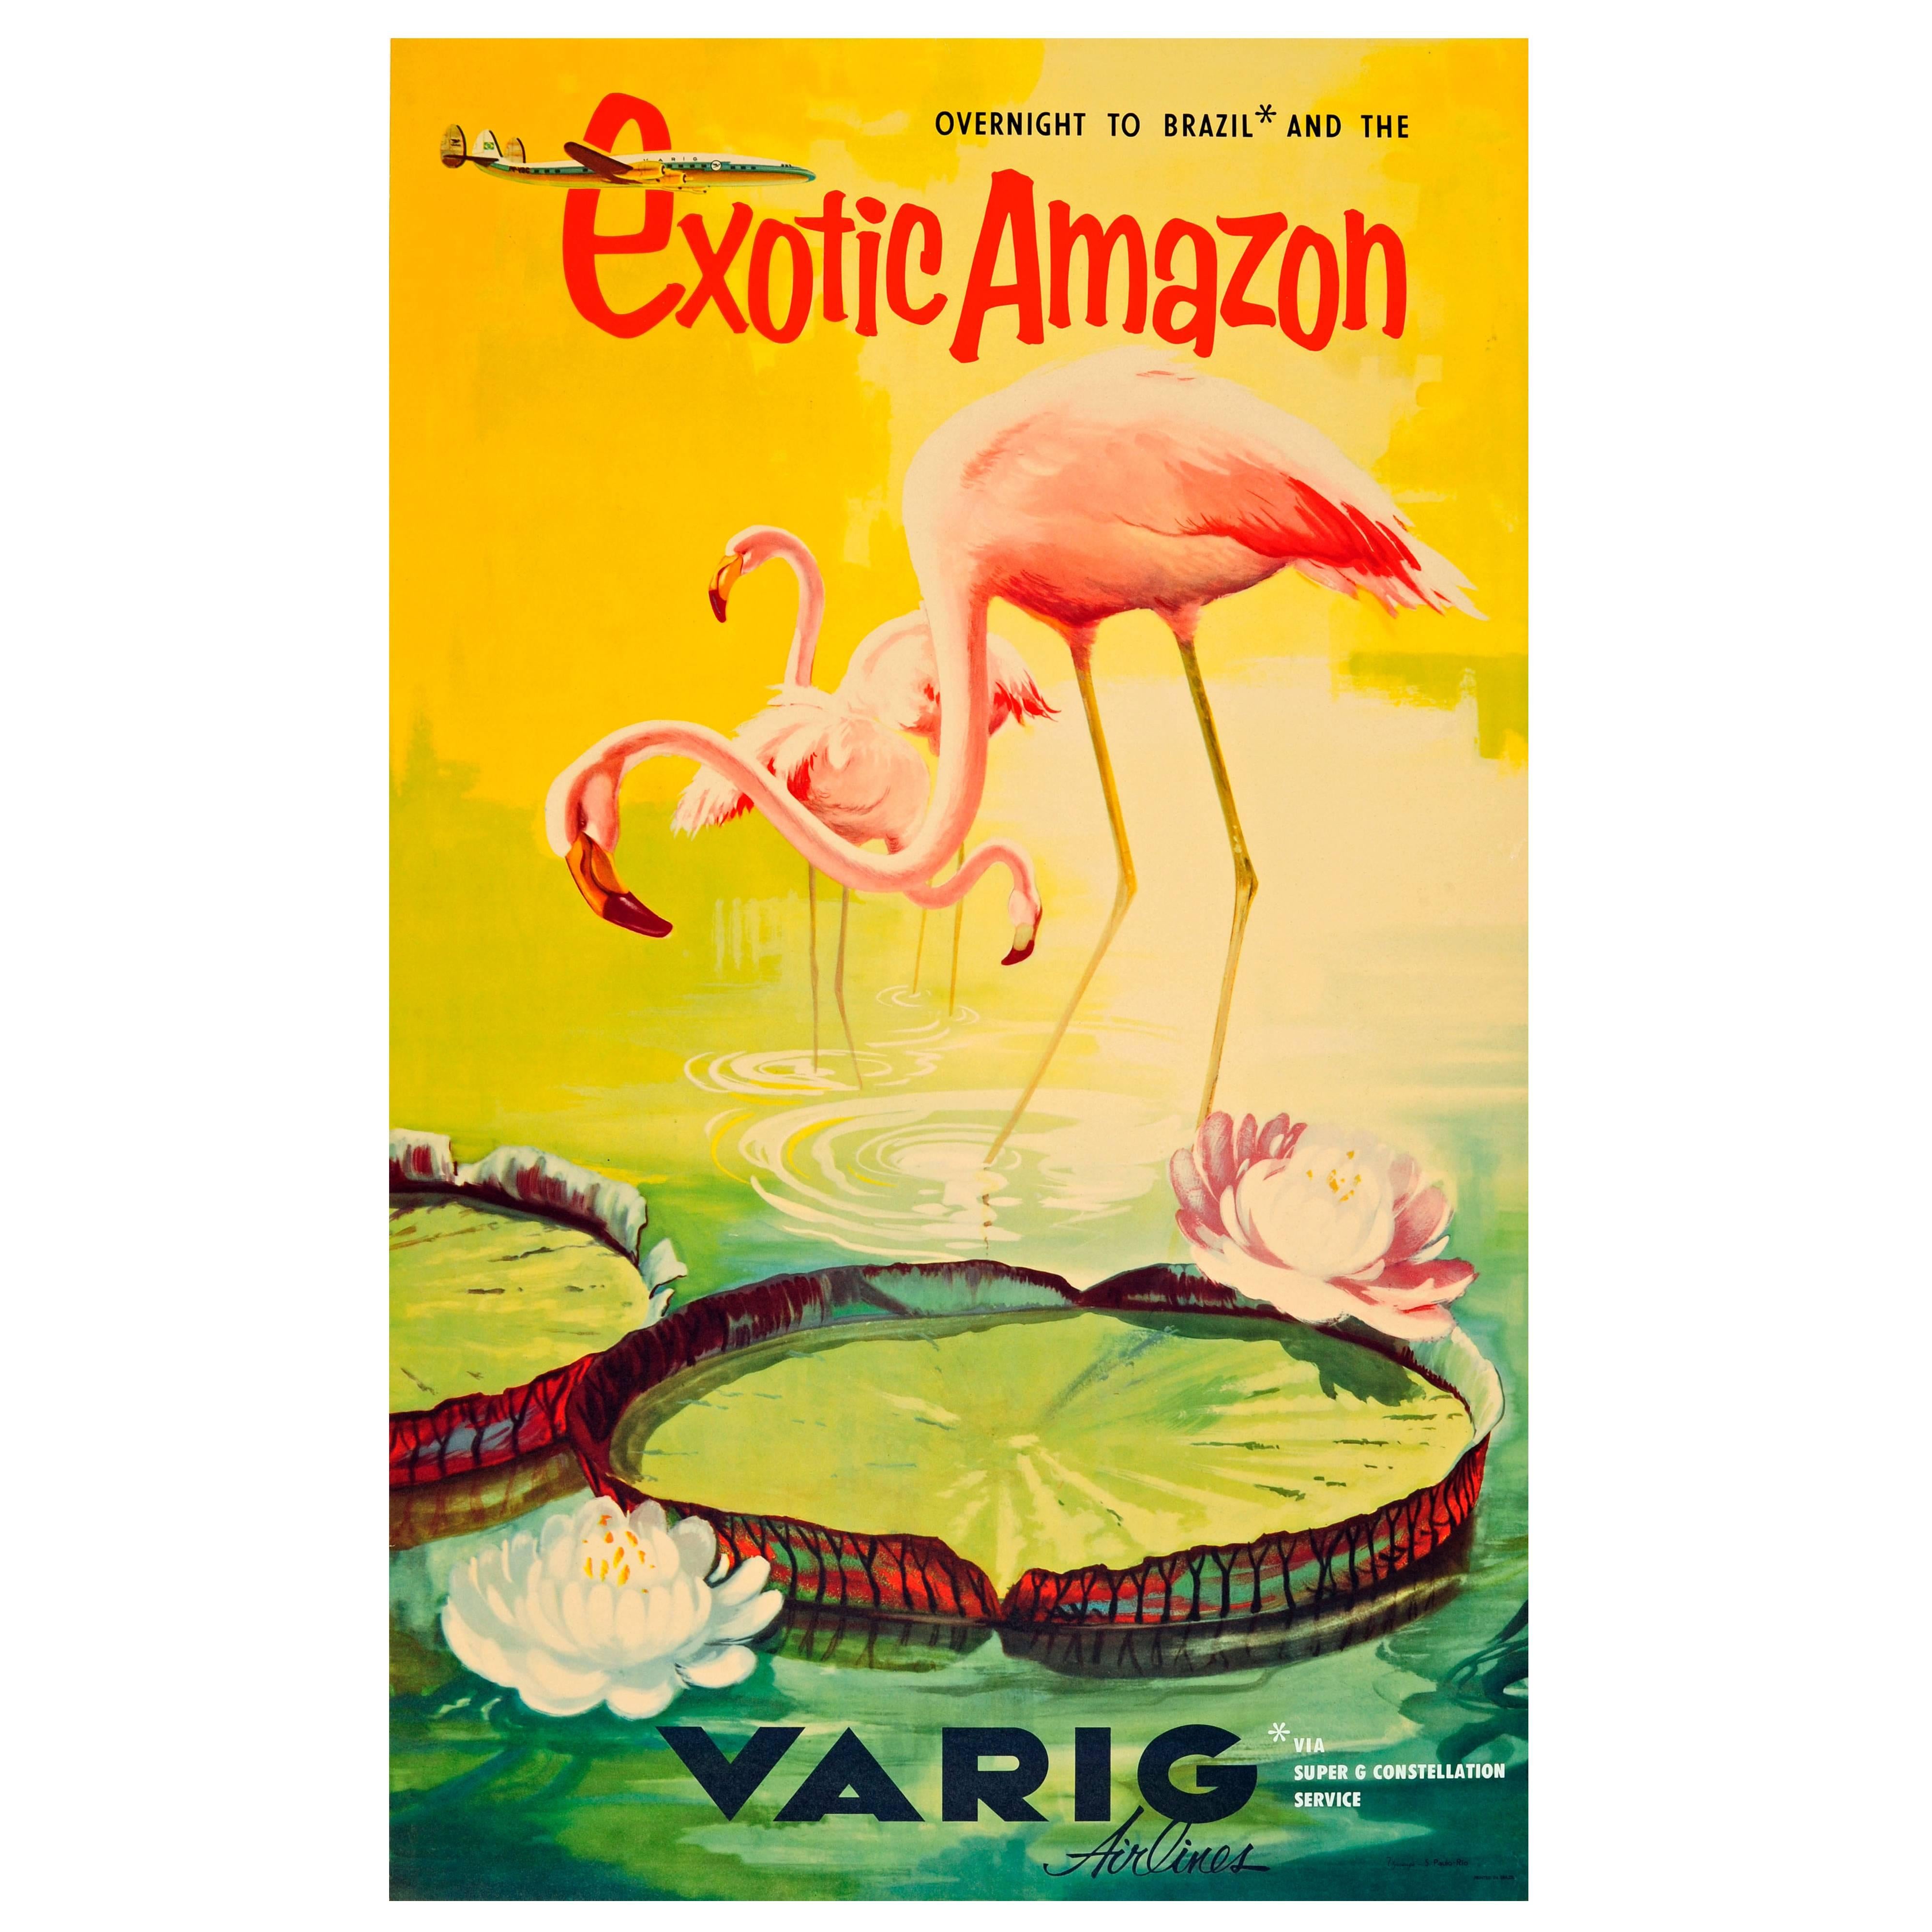 Original Vintage Travel Poster, Brazil and the Exotic Amazon by Varig Airlines